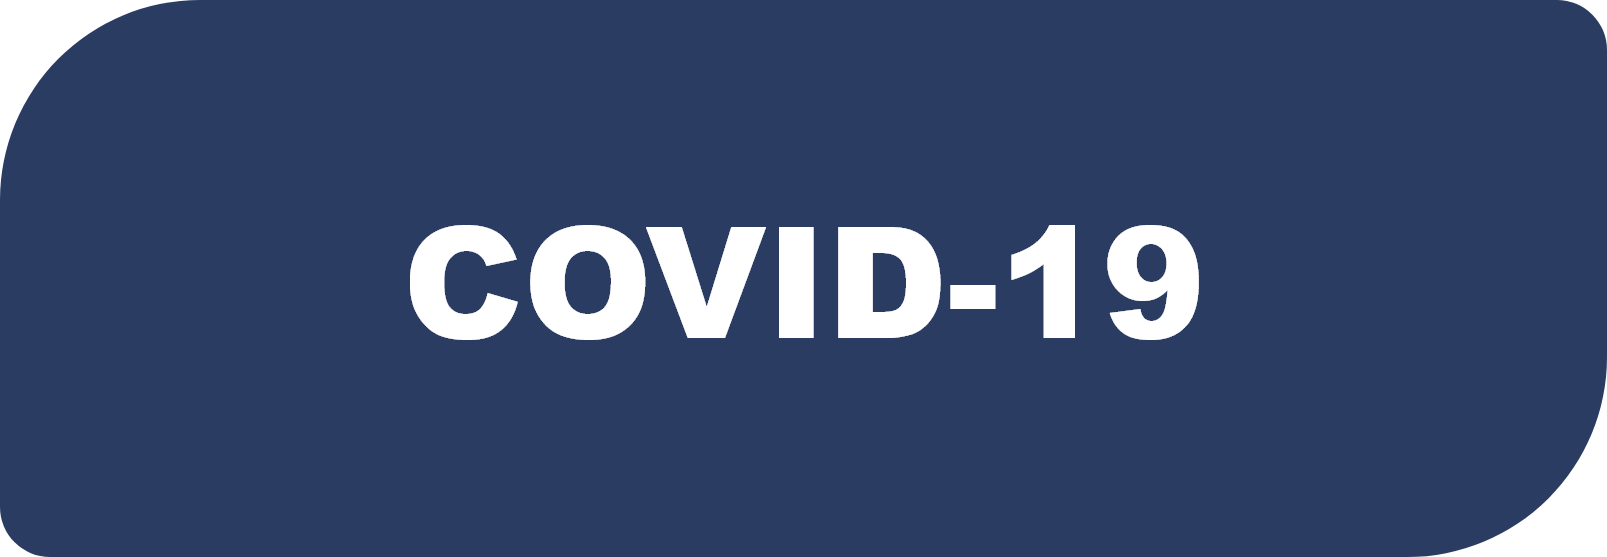 Blue button with text that reads: COVID-19